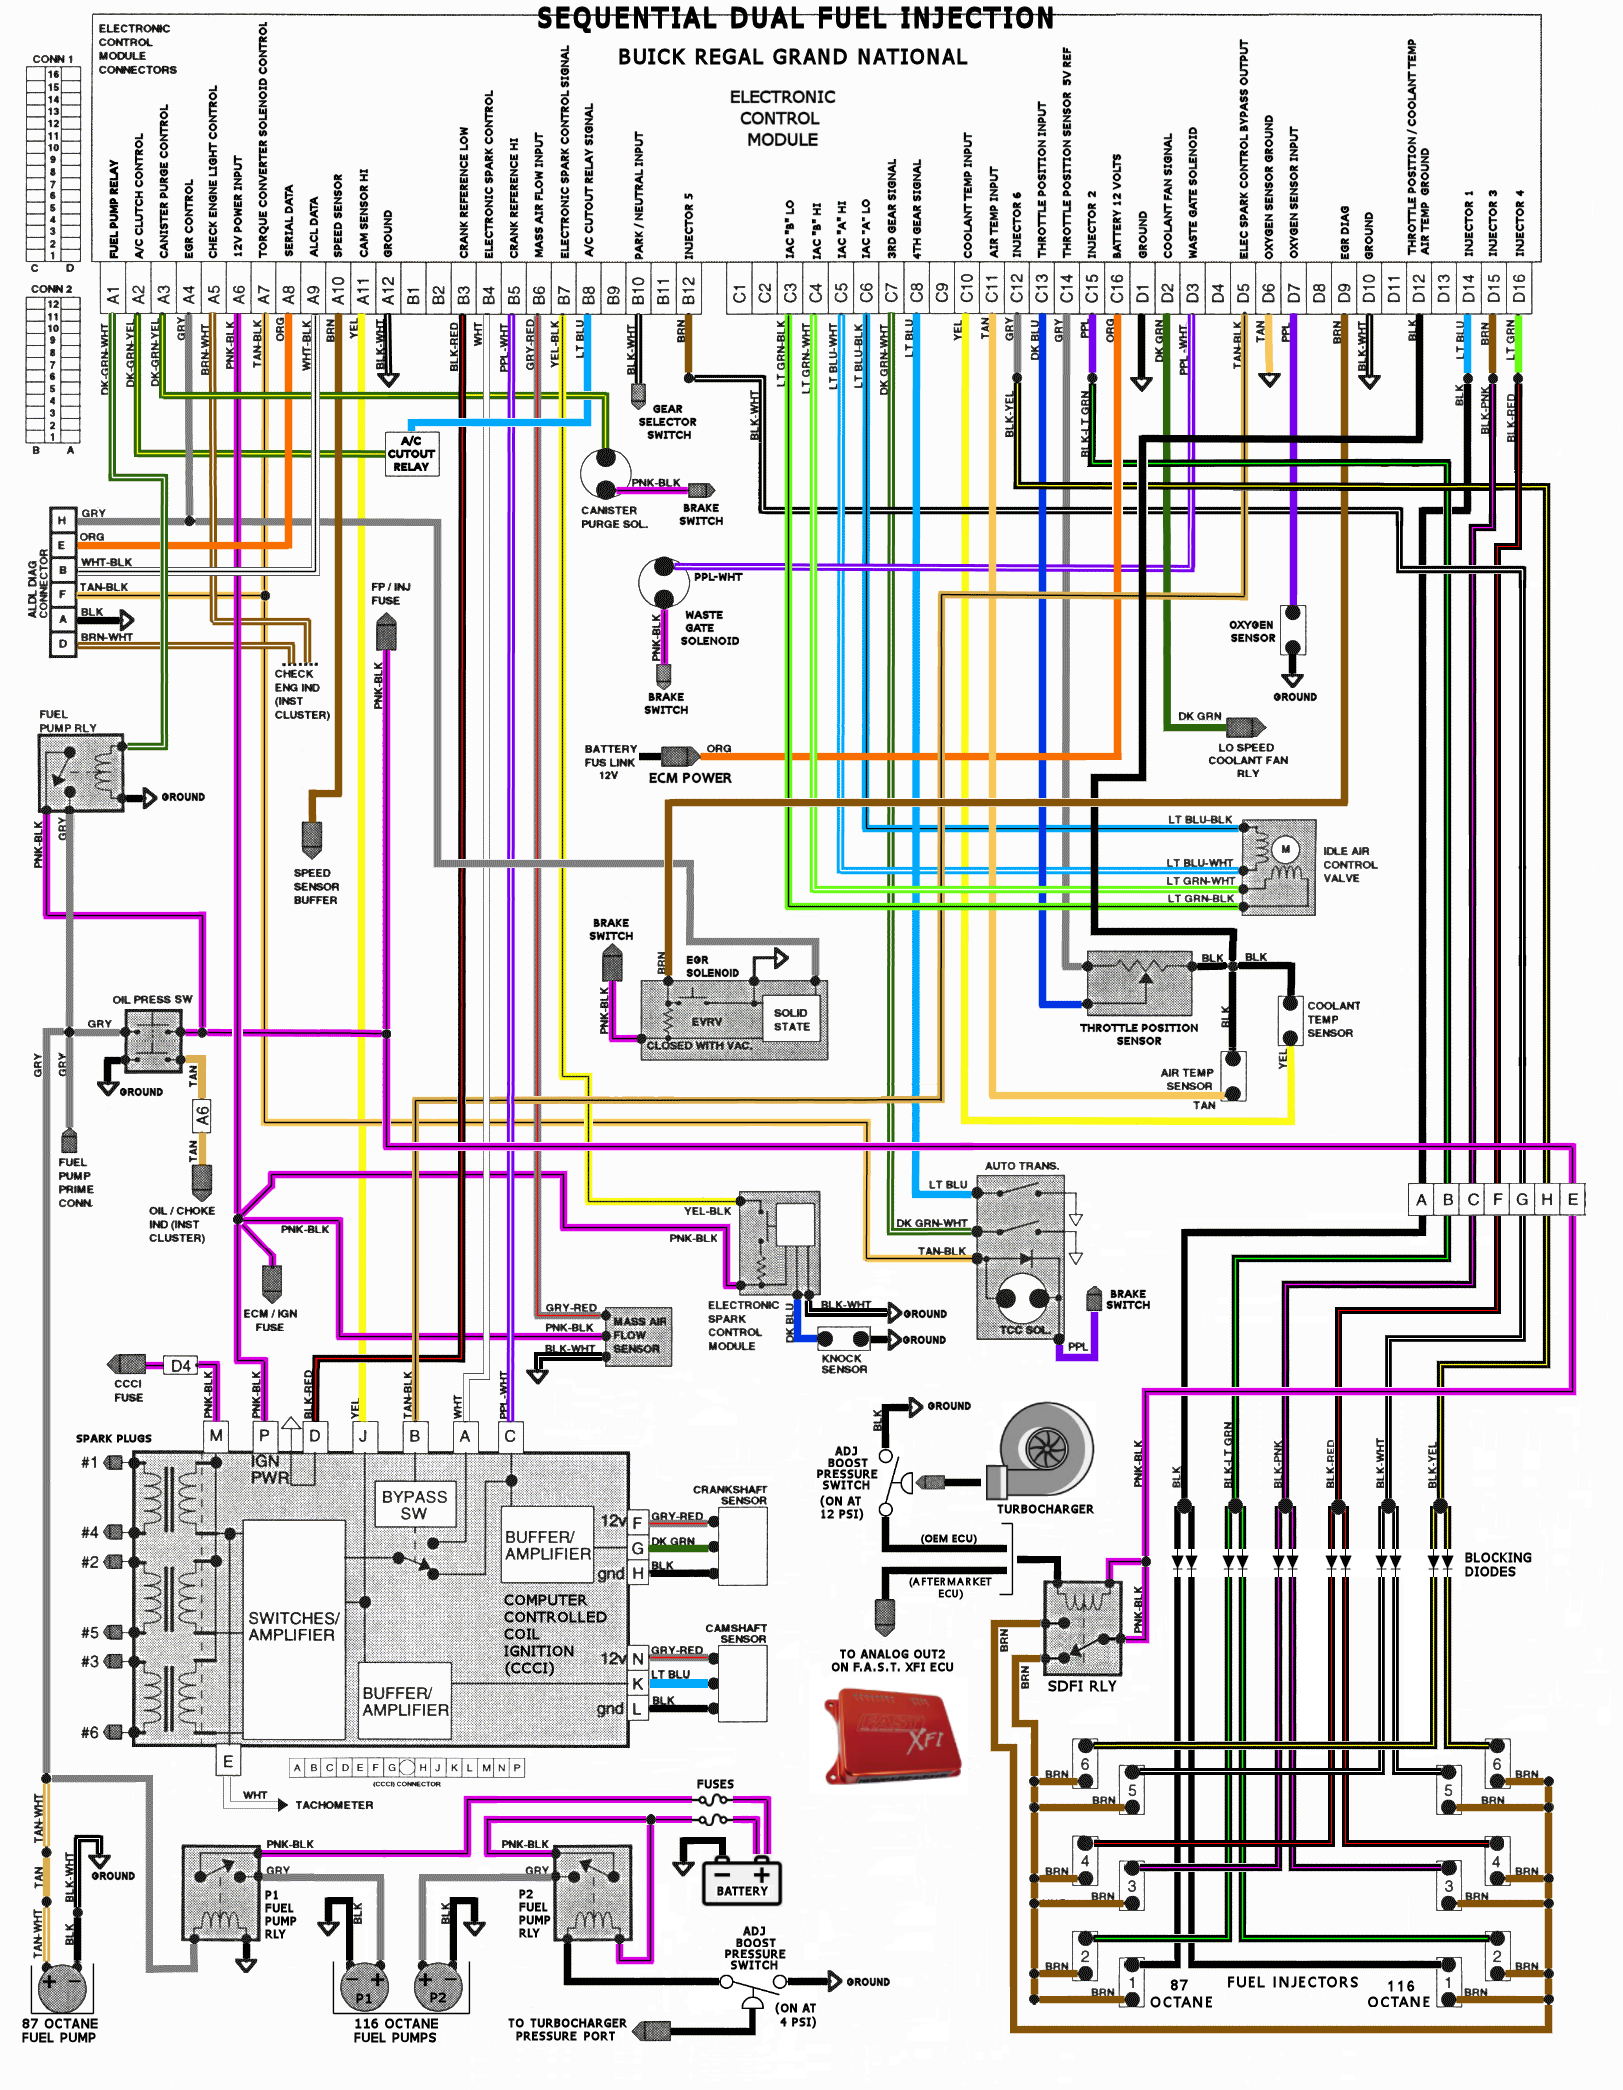 Grand National Dual Fuel Injection Wiring Diagram